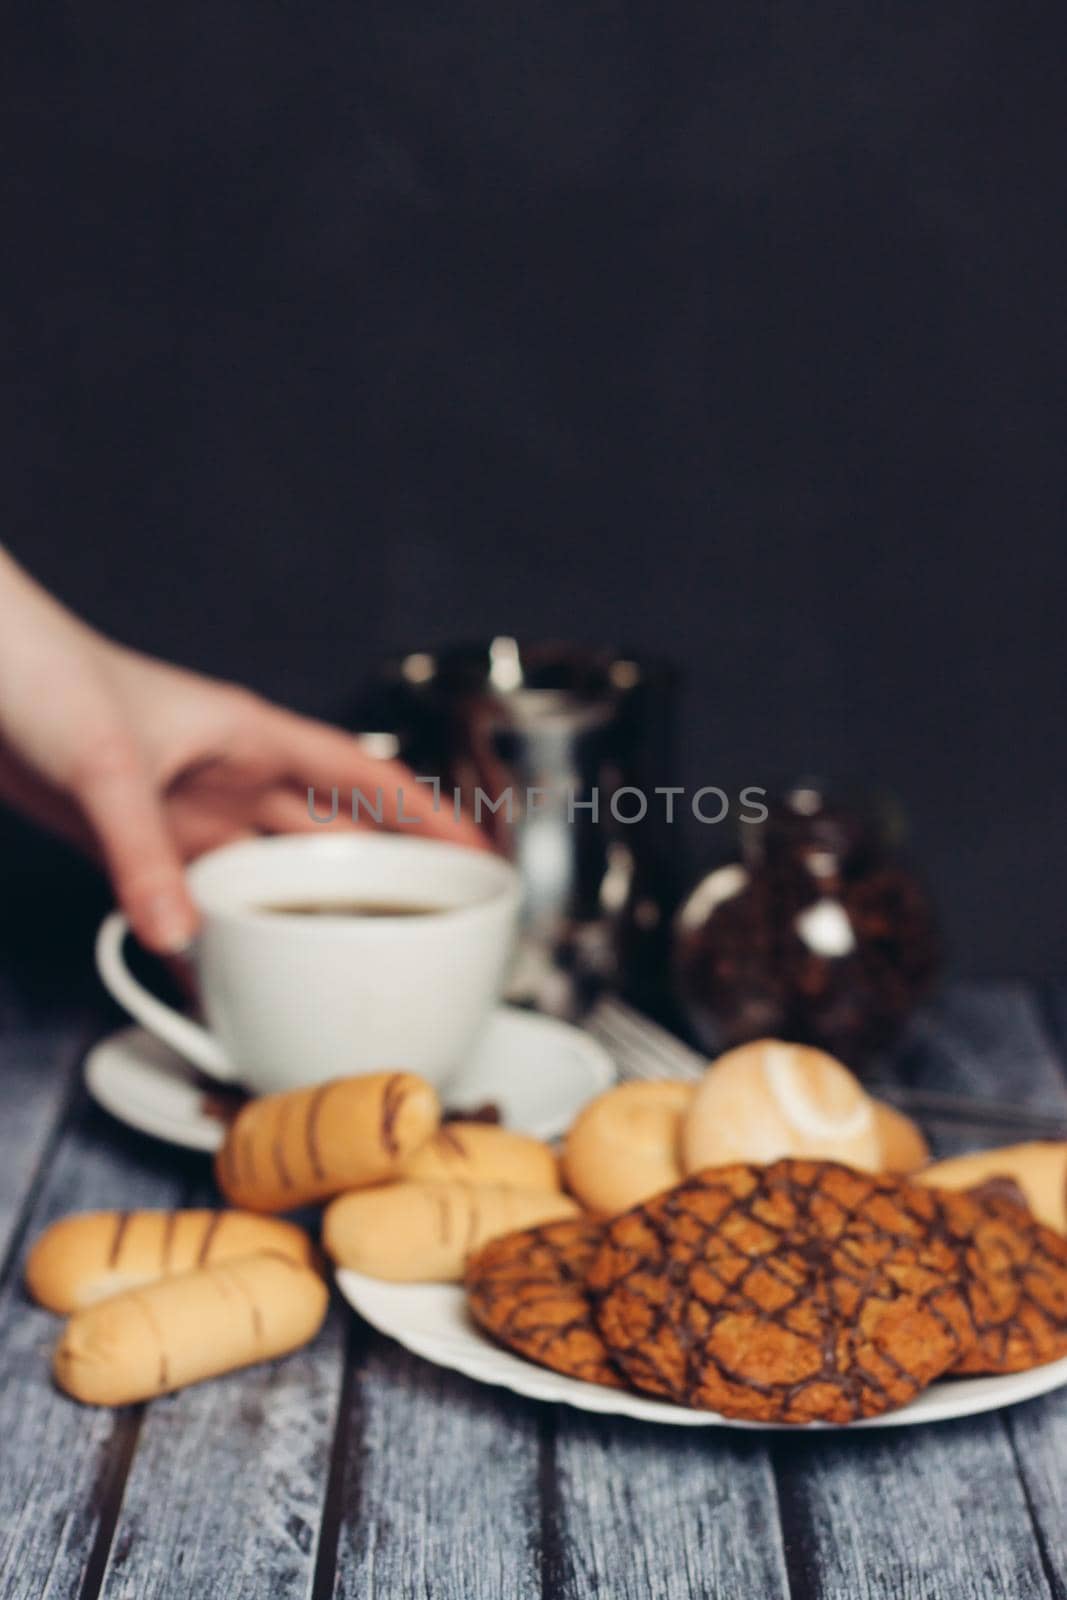 cookies on a plate sweets tea party breakfast dessert. High quality photo